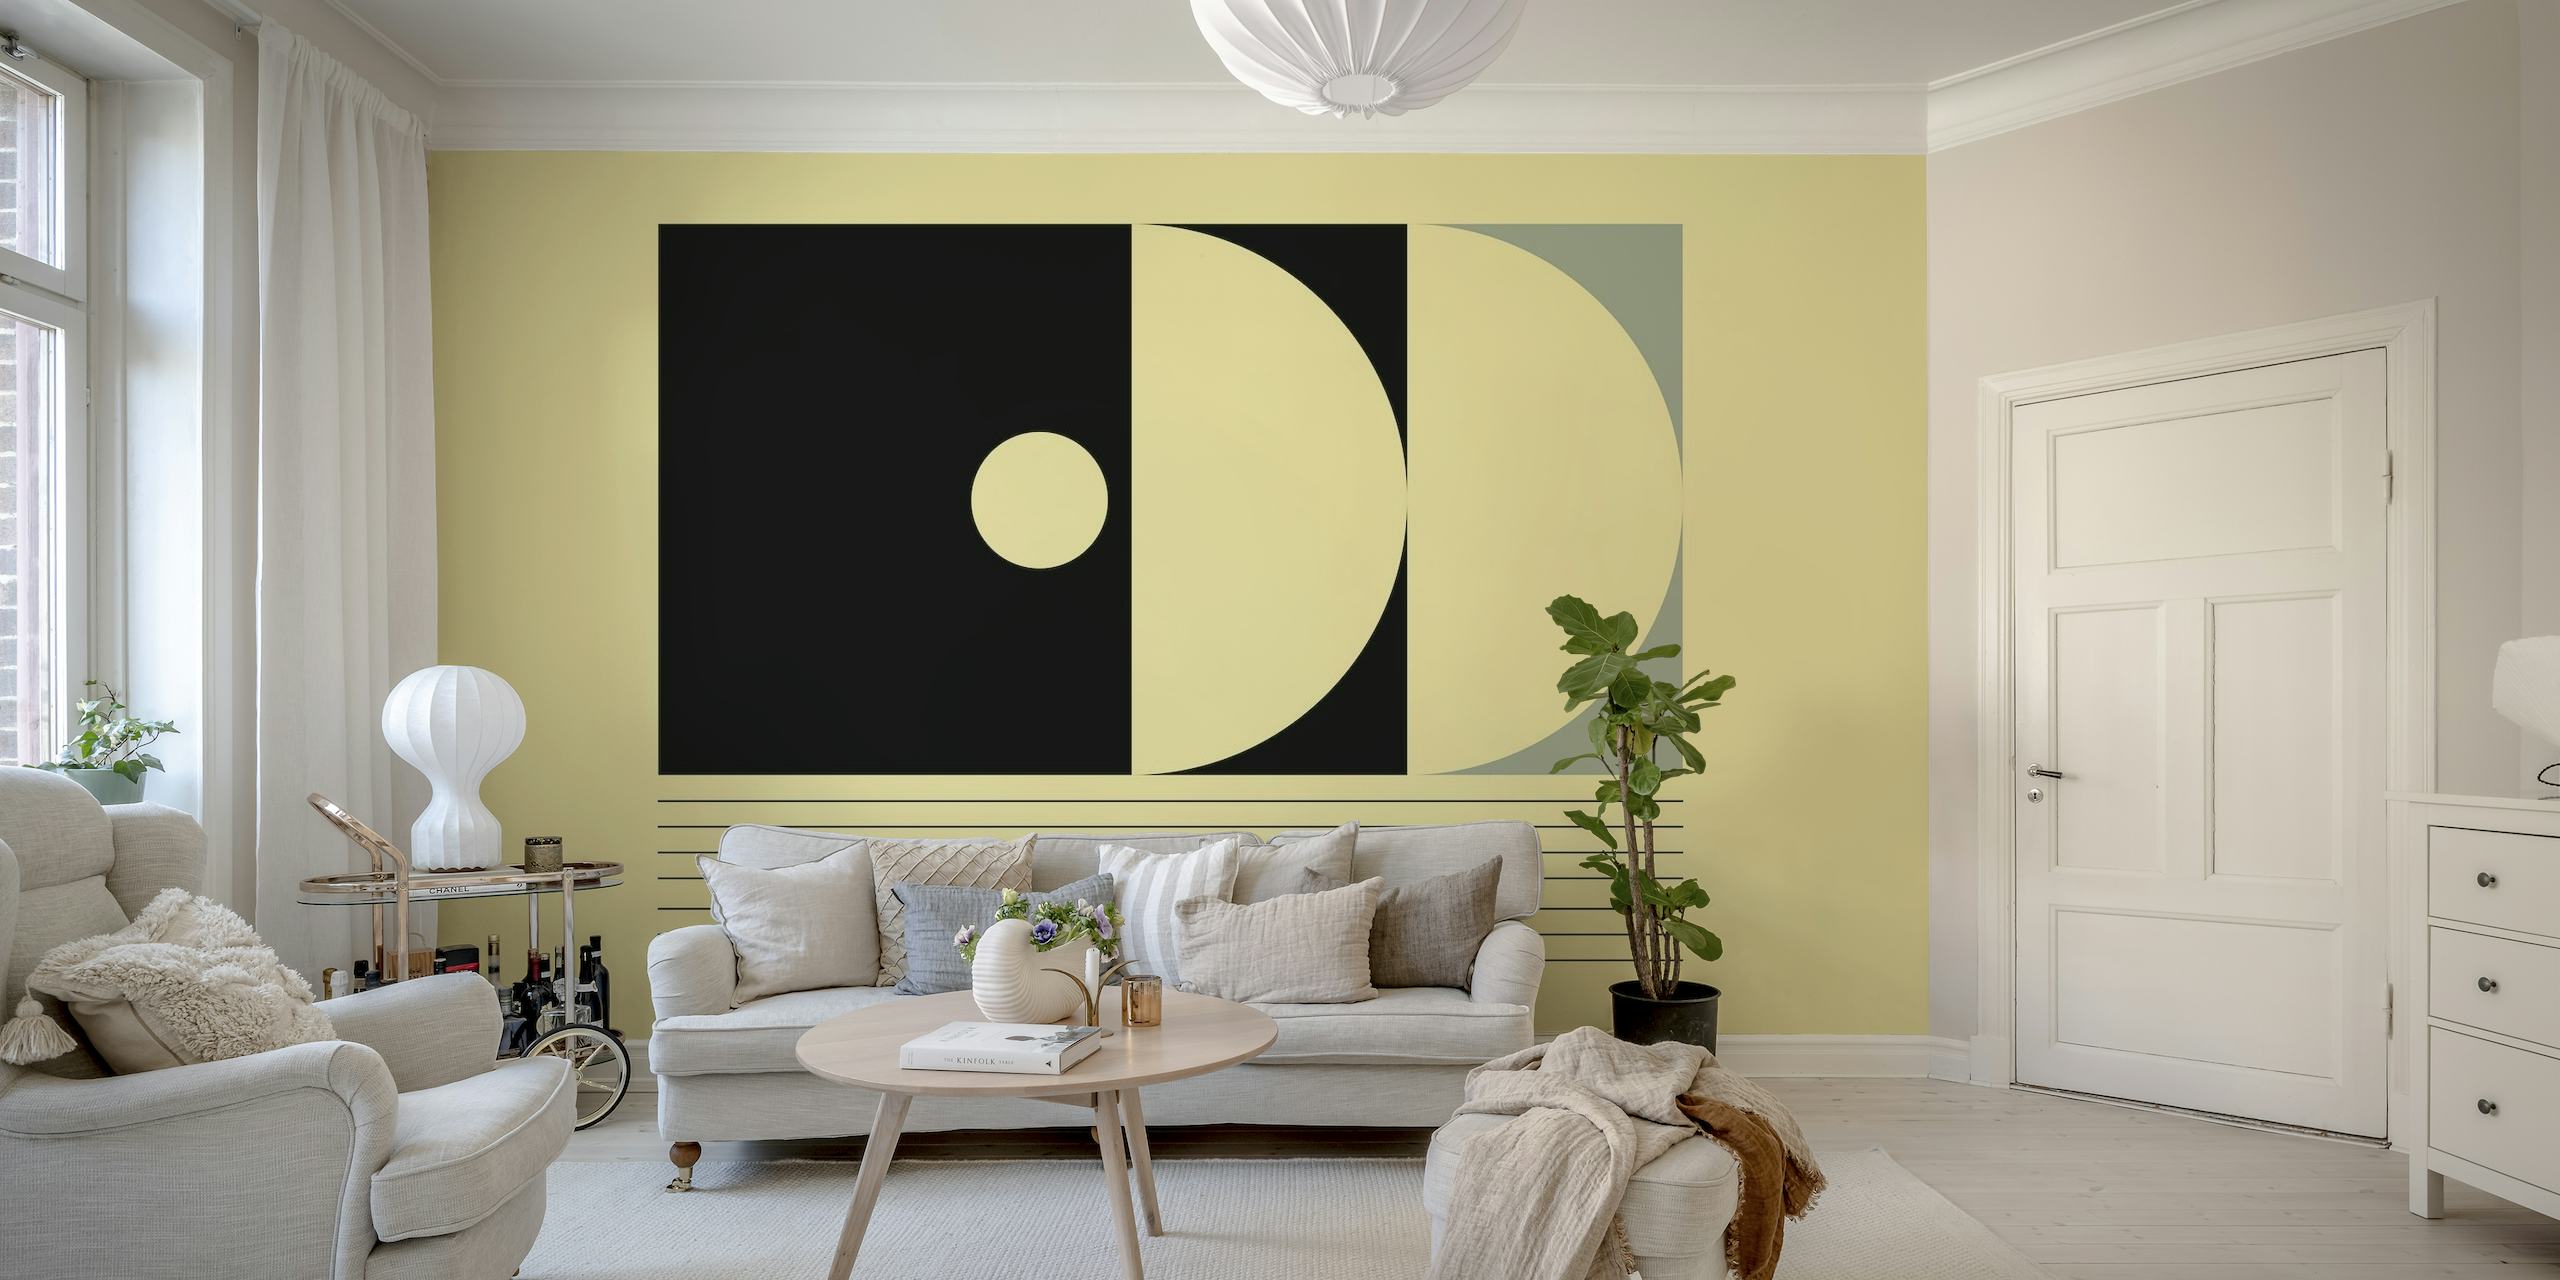 Abstract geometric wall mural in black, white, and beige